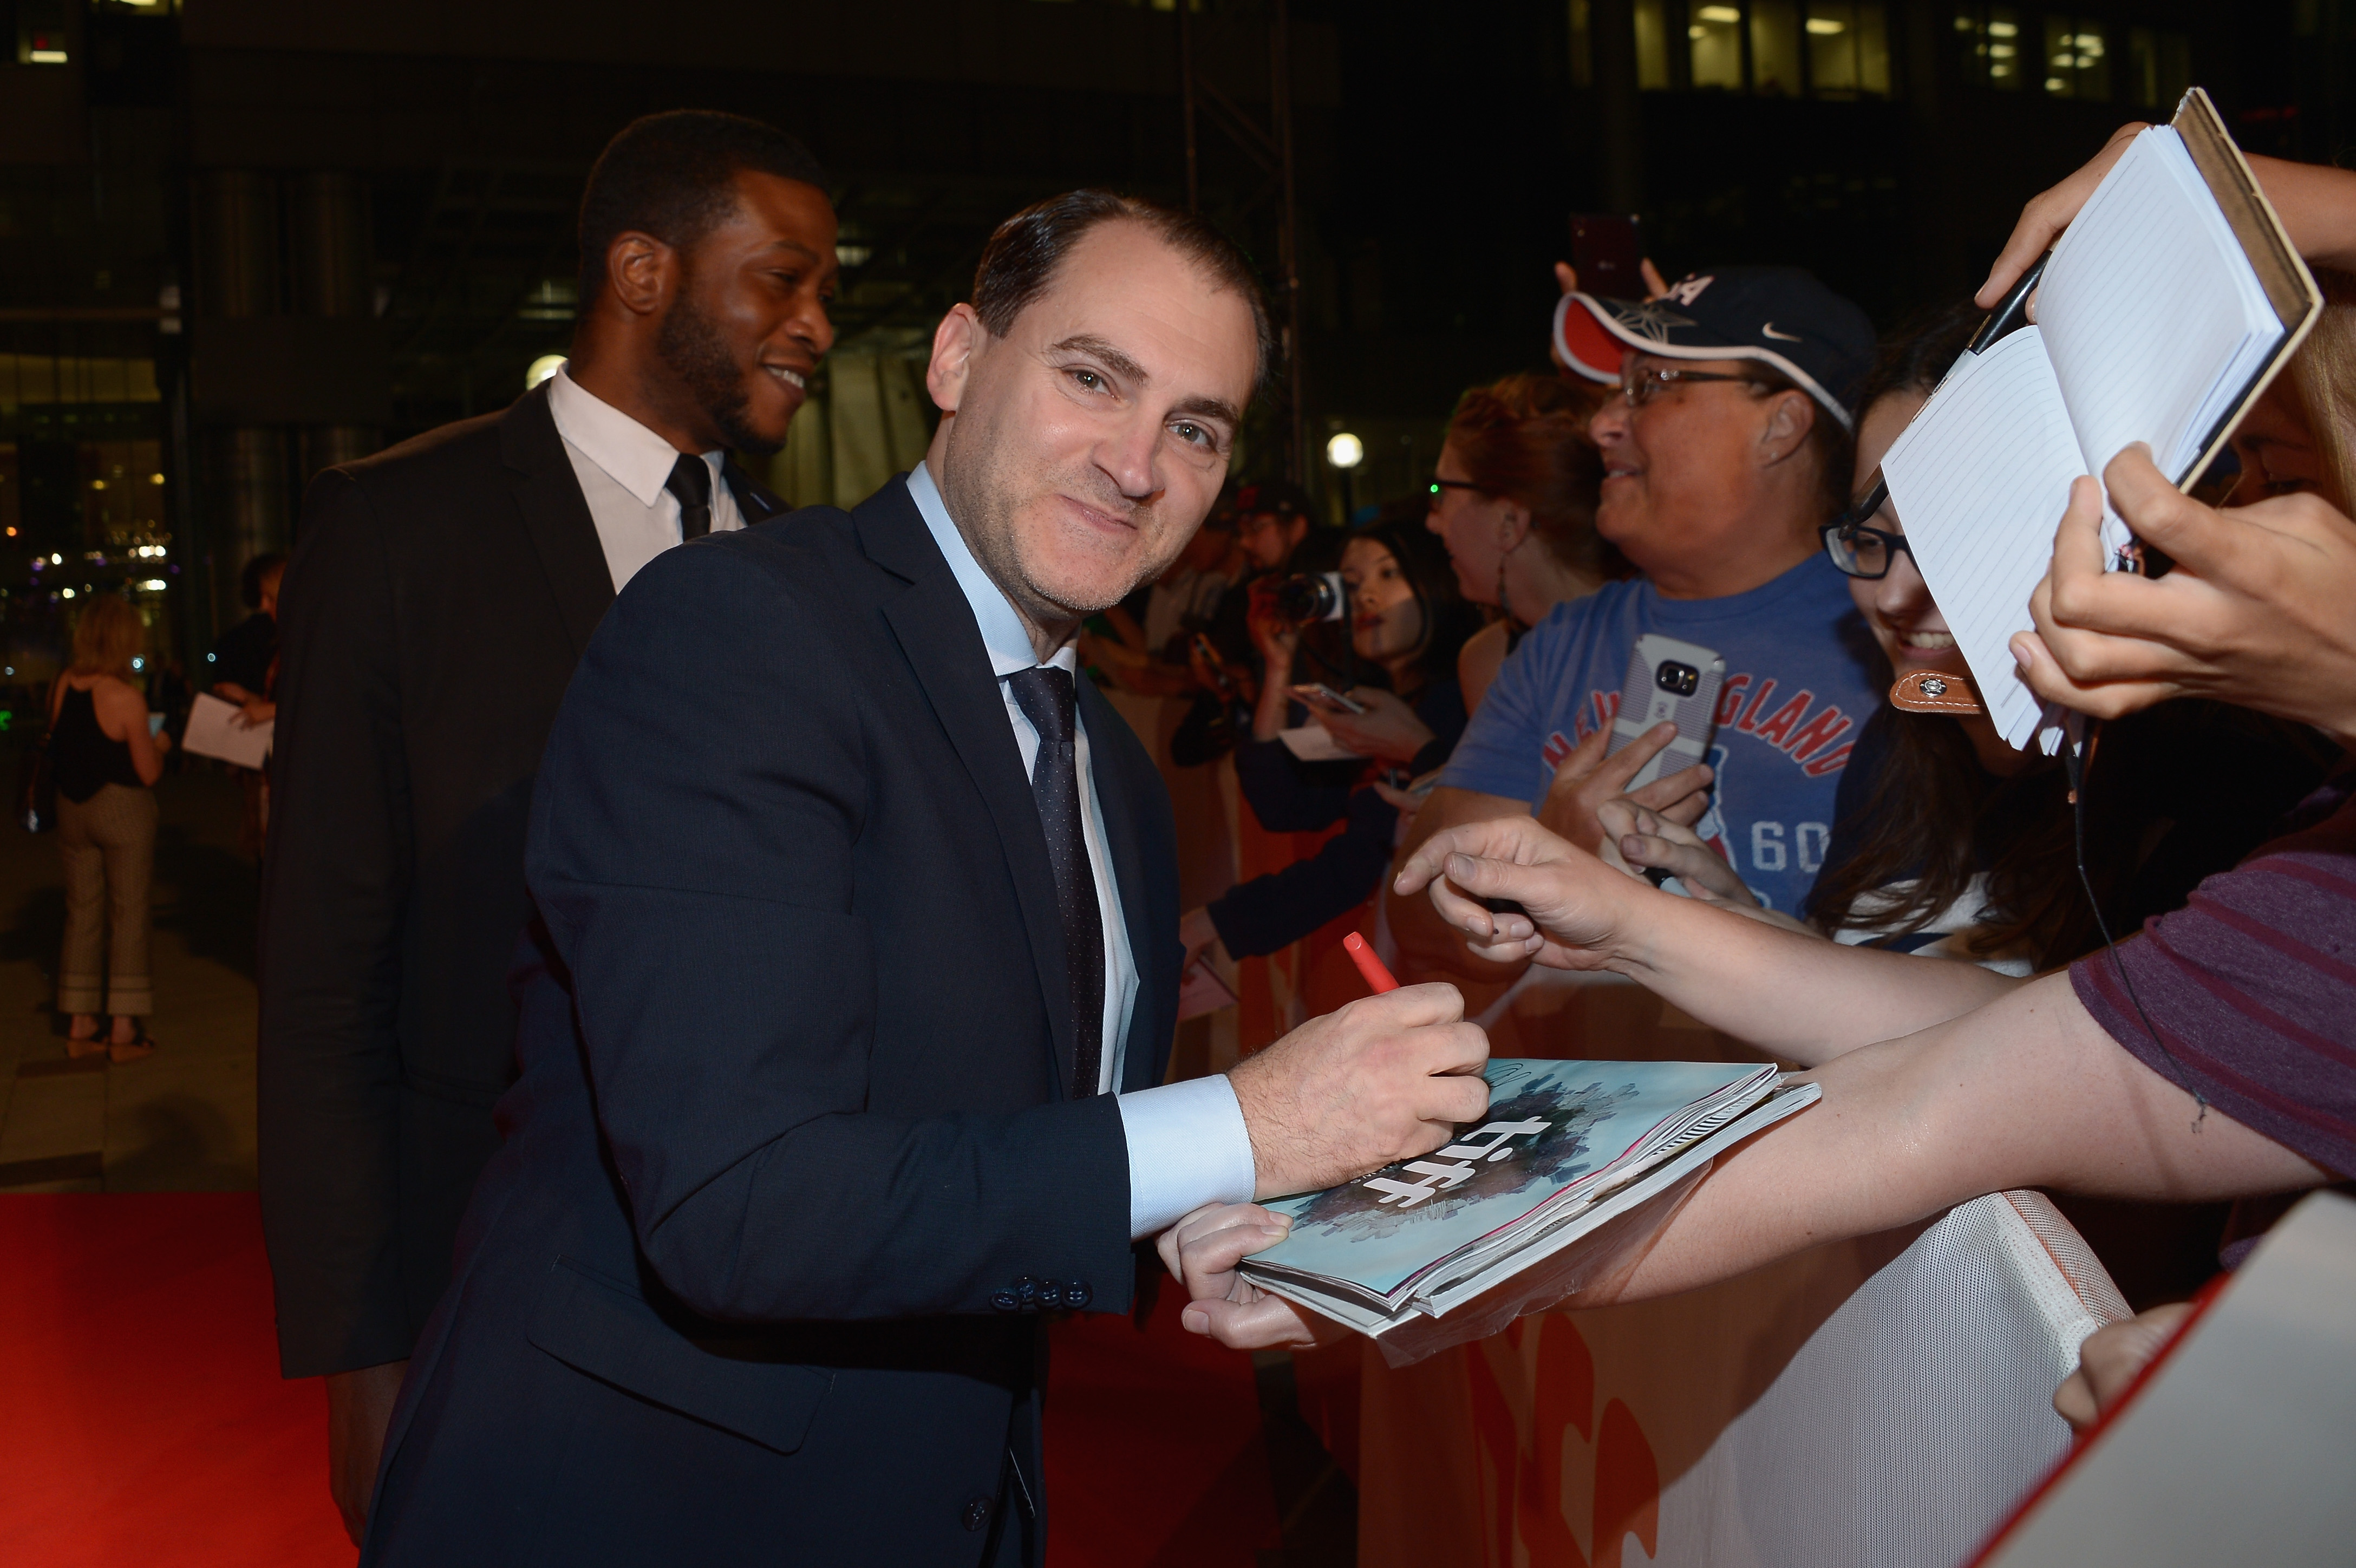 TORONTO, ON - SEPTEMBER 12:  Actor Michael Stuhlbarg greets fans at the "Arrival" premiere during the 2016 Toronto International Film Festival at Roy Thomson Hall on September 12, 2016 in Toronto, Canada.  (Photo by Alberto E. Rodriguez/Getty Images)